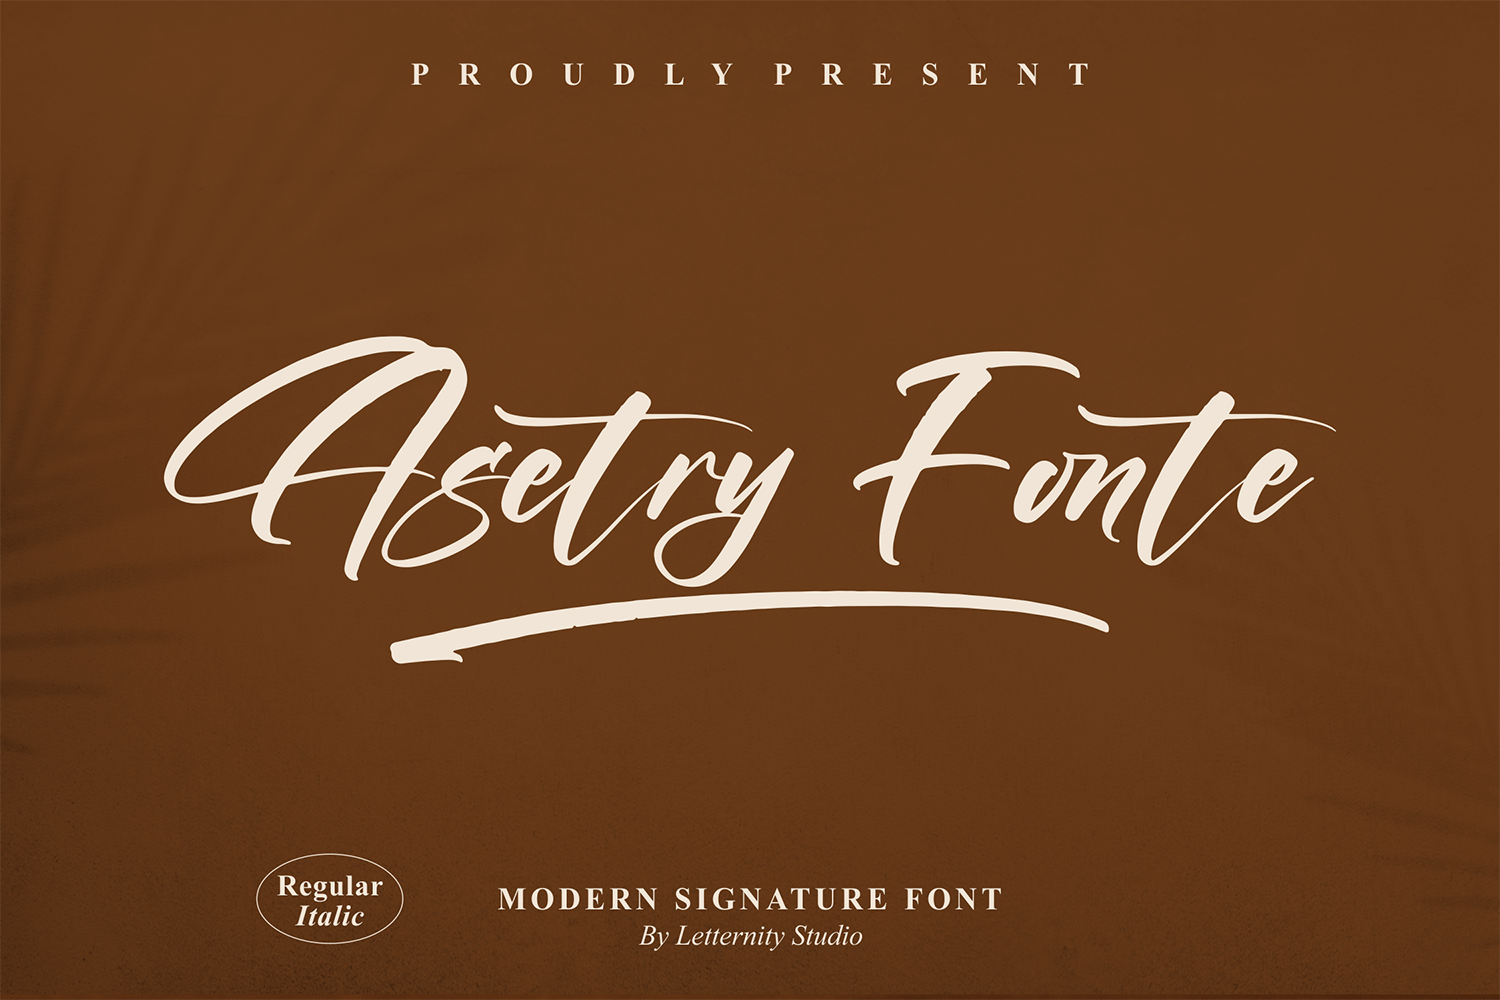 Asetry Fonte Free Font